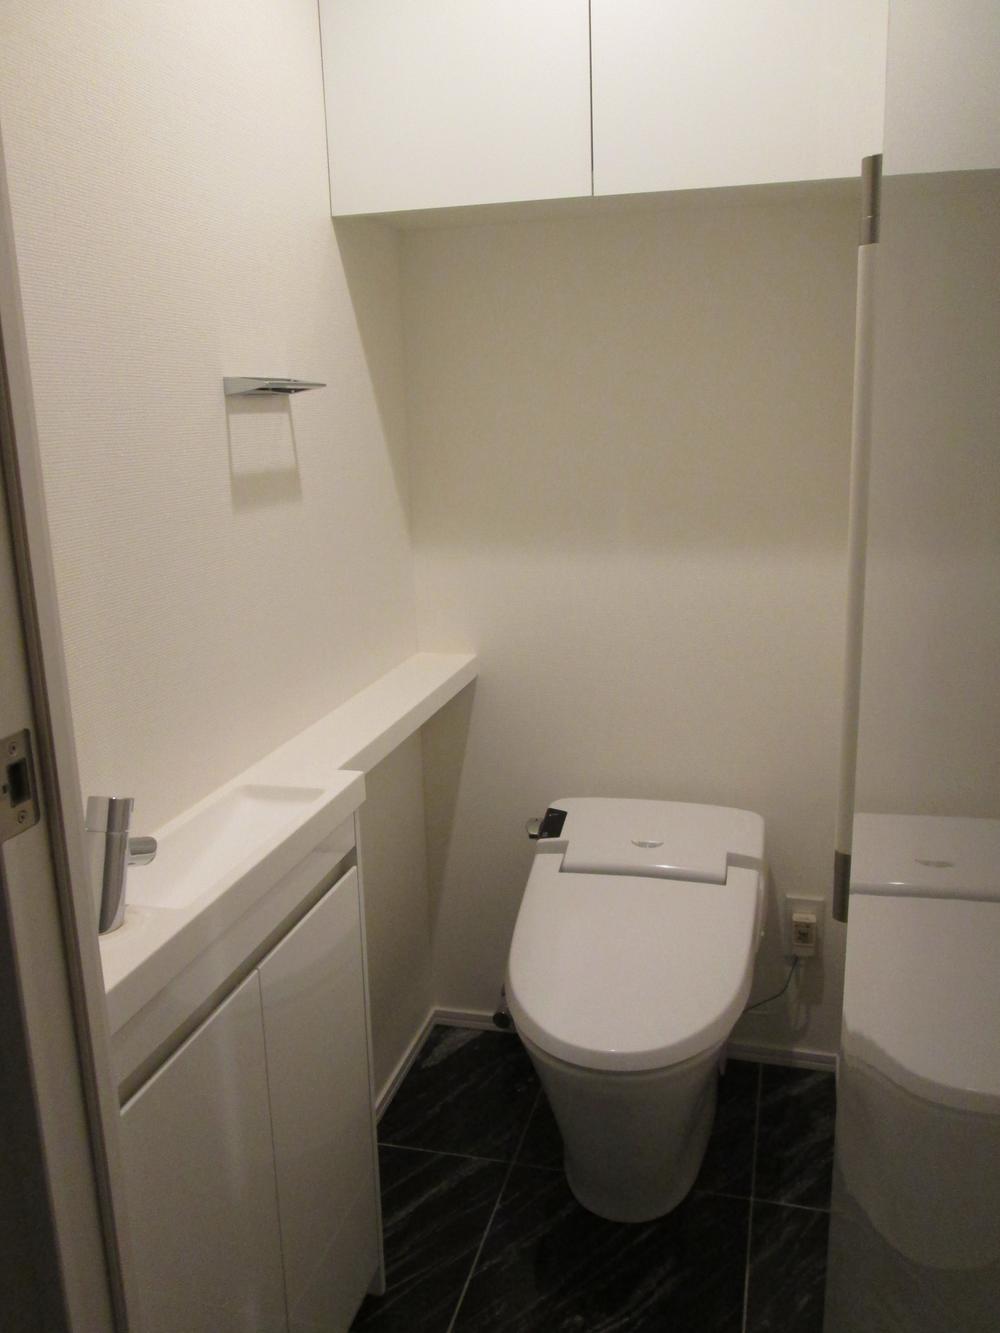 Toilet. Room clean in tankless. The hanging cupboard is possible stock storage.